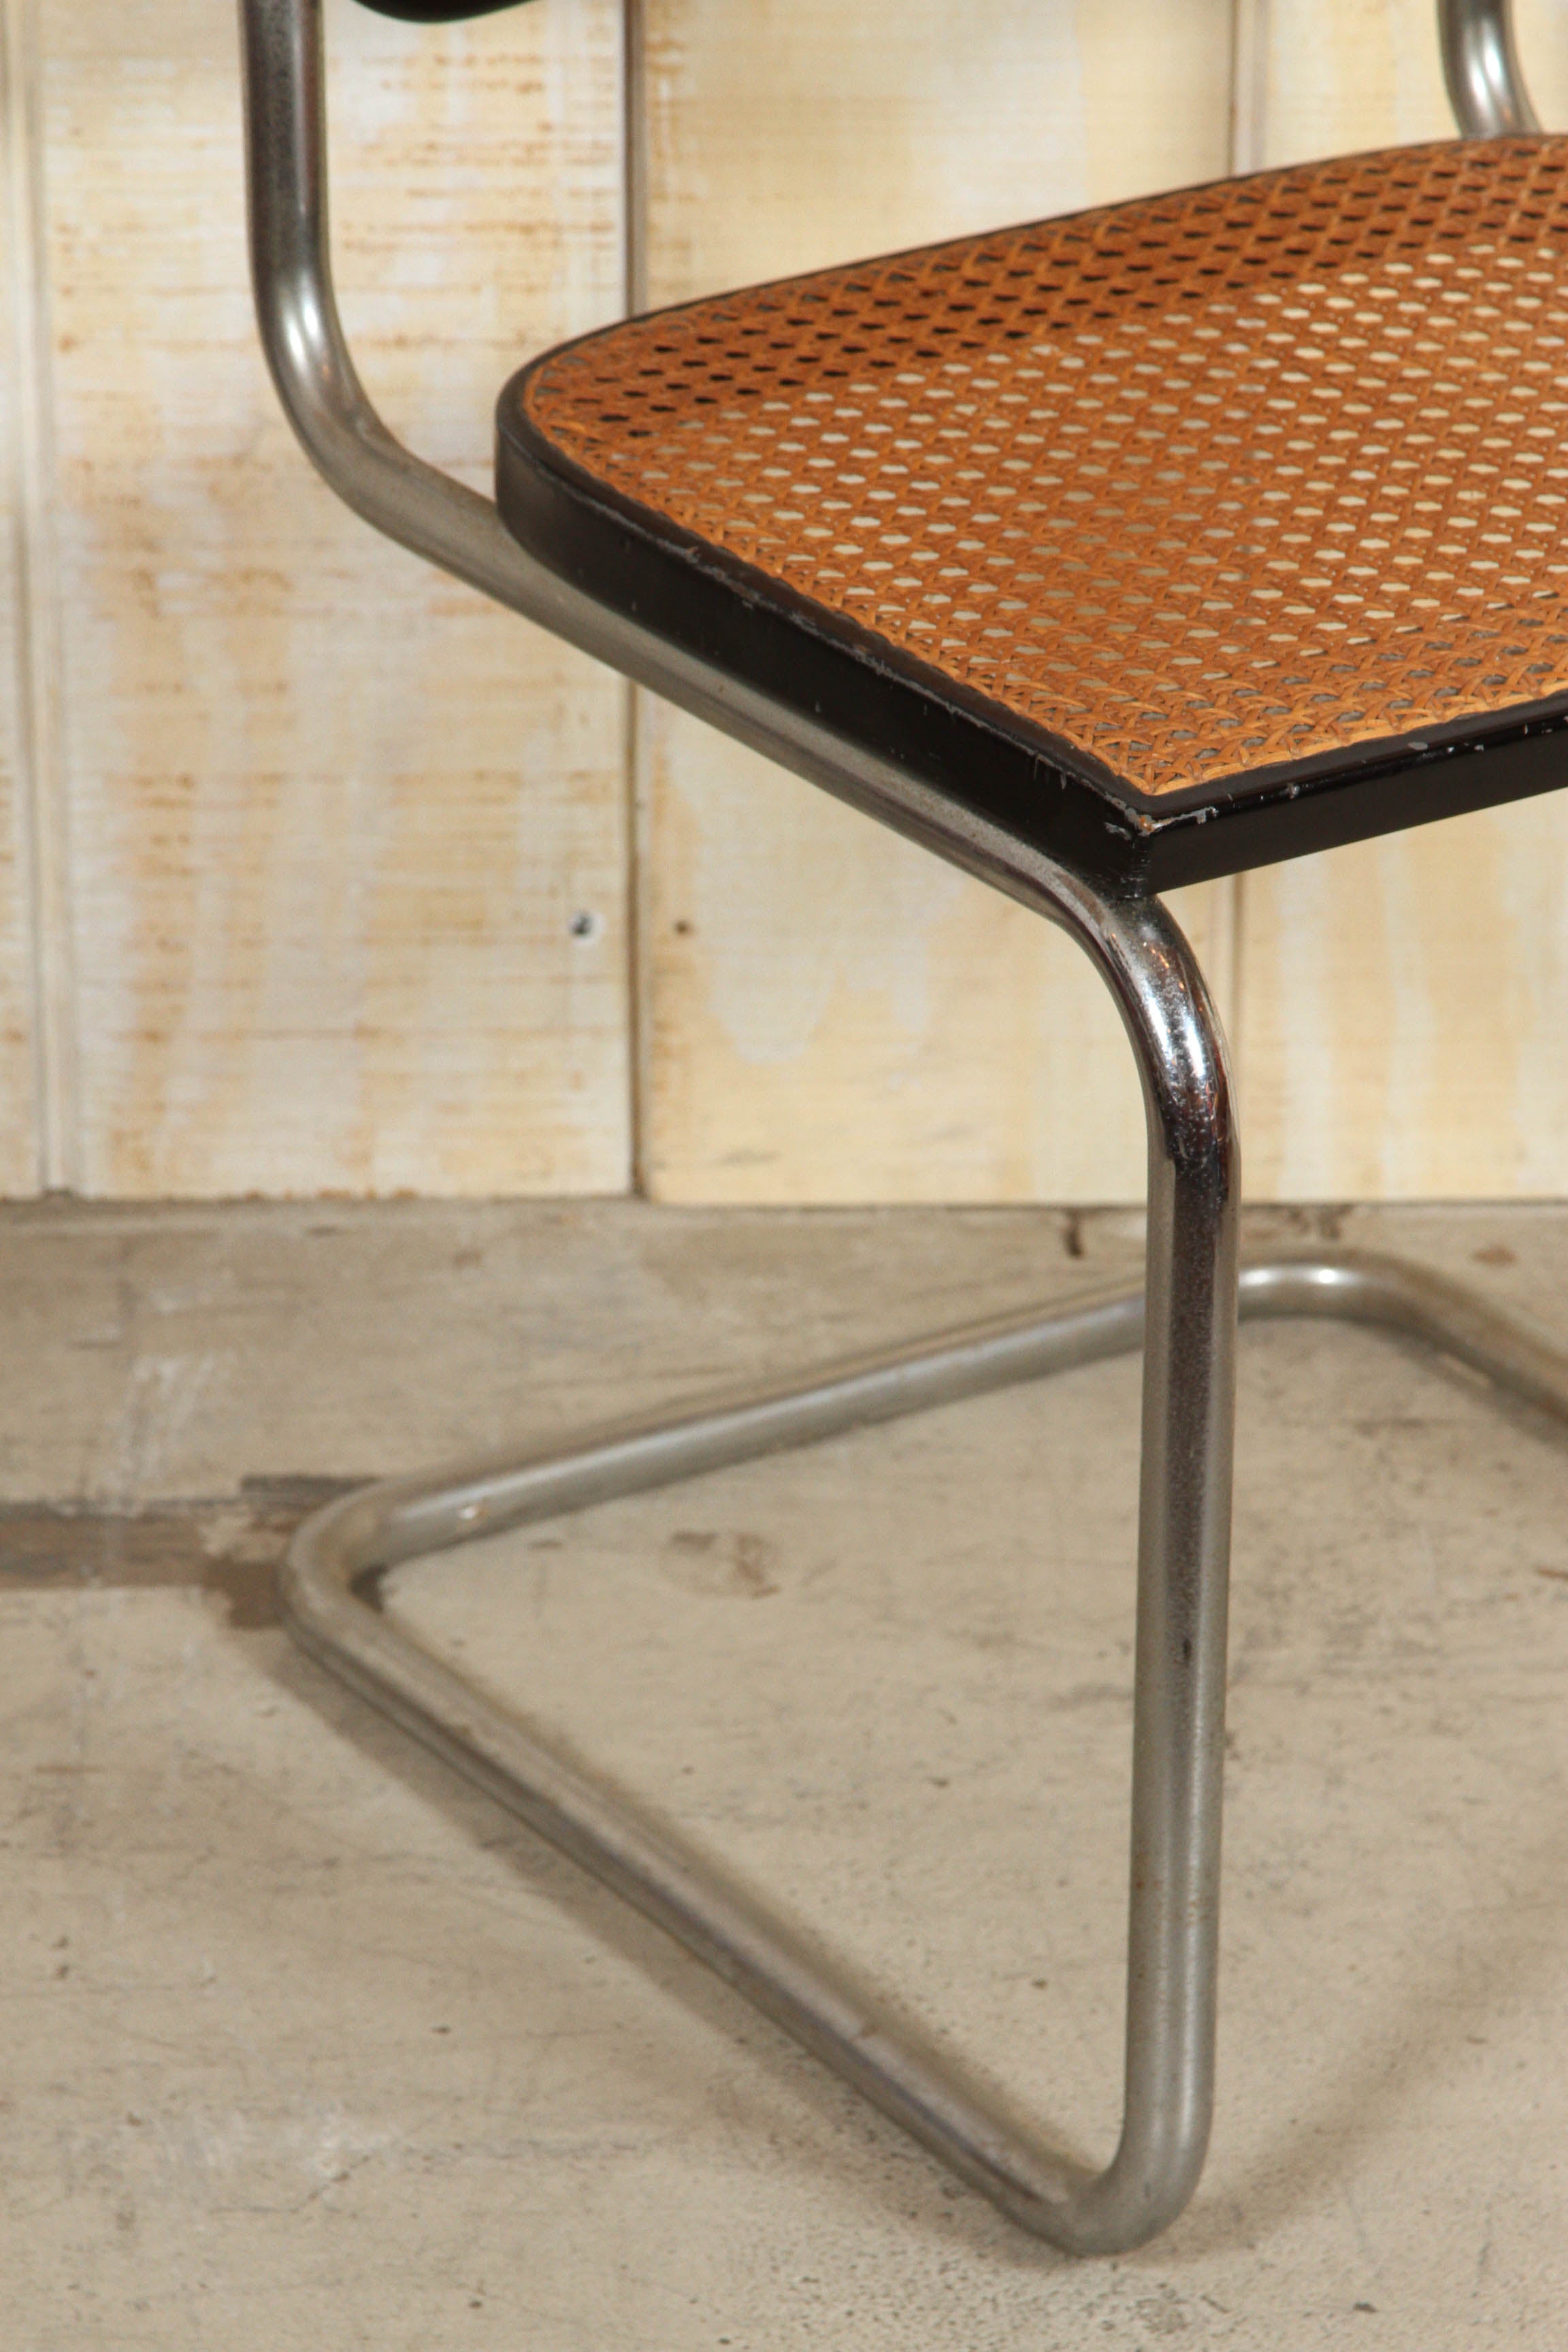 50-111 Cesca Side Chair by Marcel Breuer for Knoll.
Tubular Steel frame with polished chrome finish.
Hnadwoven cane with with solid wood matte black frame.